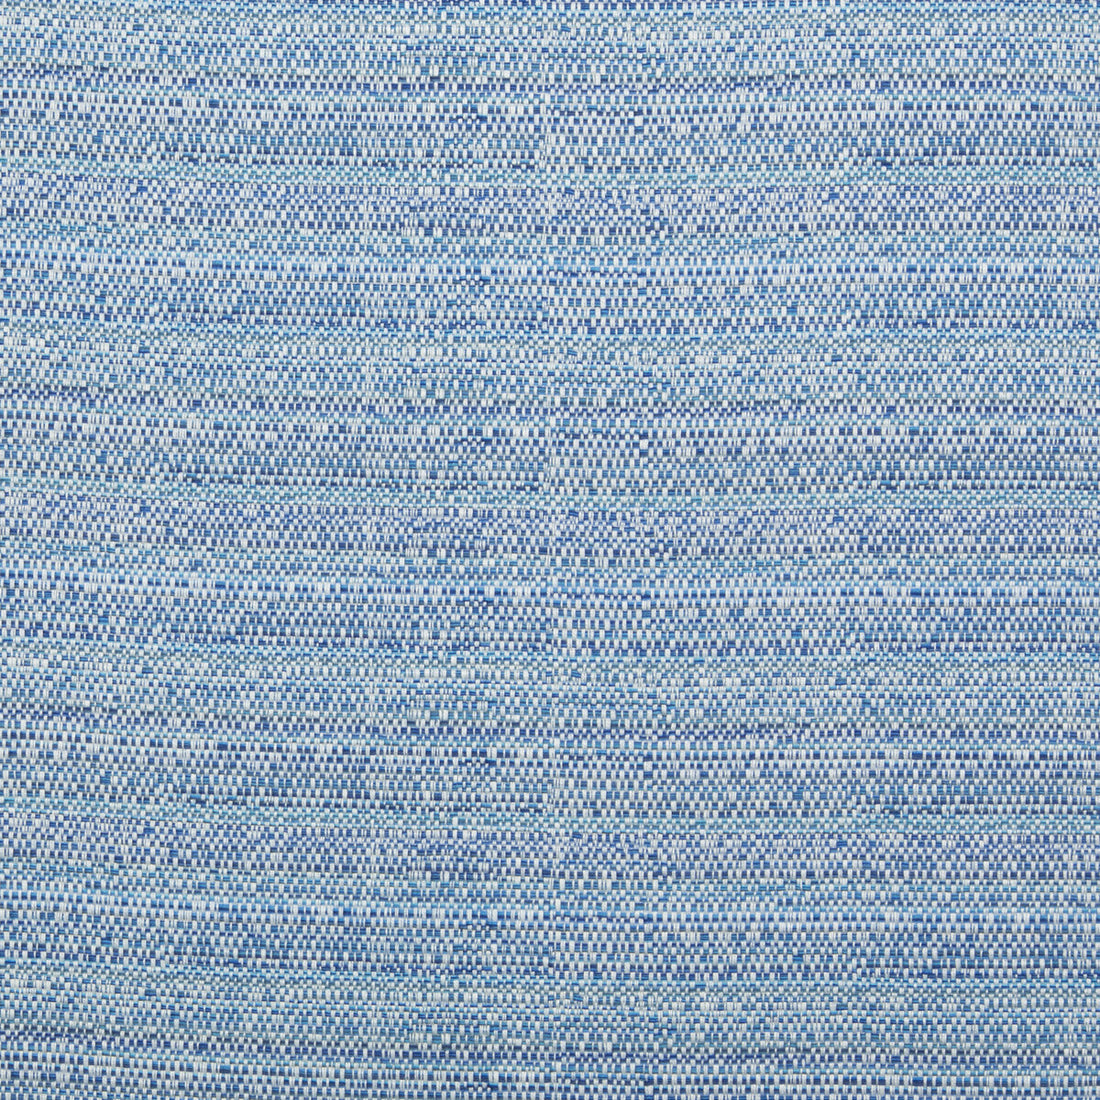 Melanger fabric in maritime color - pattern 31695.515.0 - by Kravet Couture in the Echo Indoor Outdoor Ibiza collection